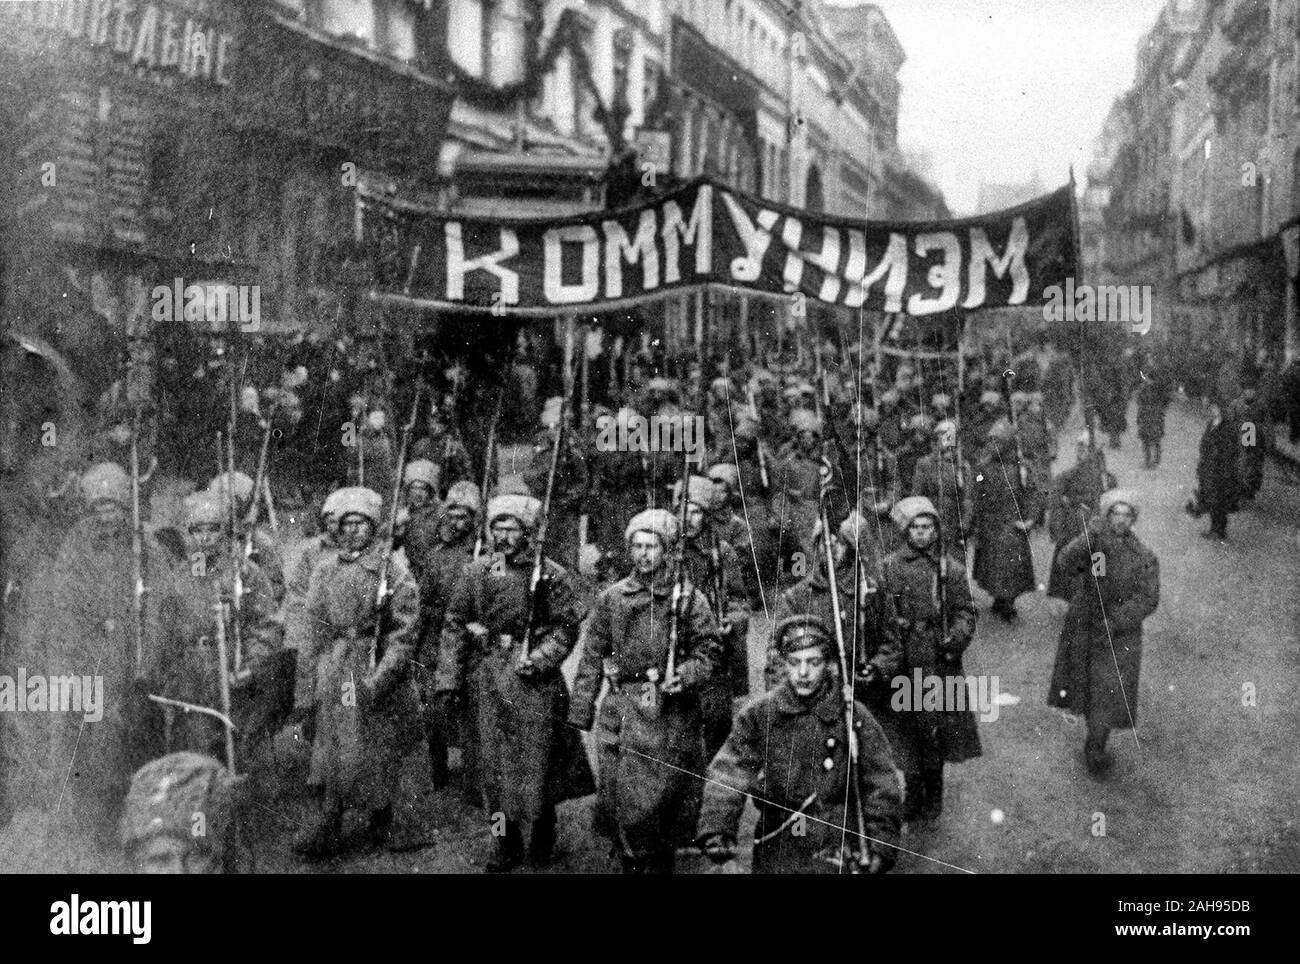 Armed soldiers carry a banner reading 'Communism', Nikolskaya street, Moscow, October 1917 Stock Photo